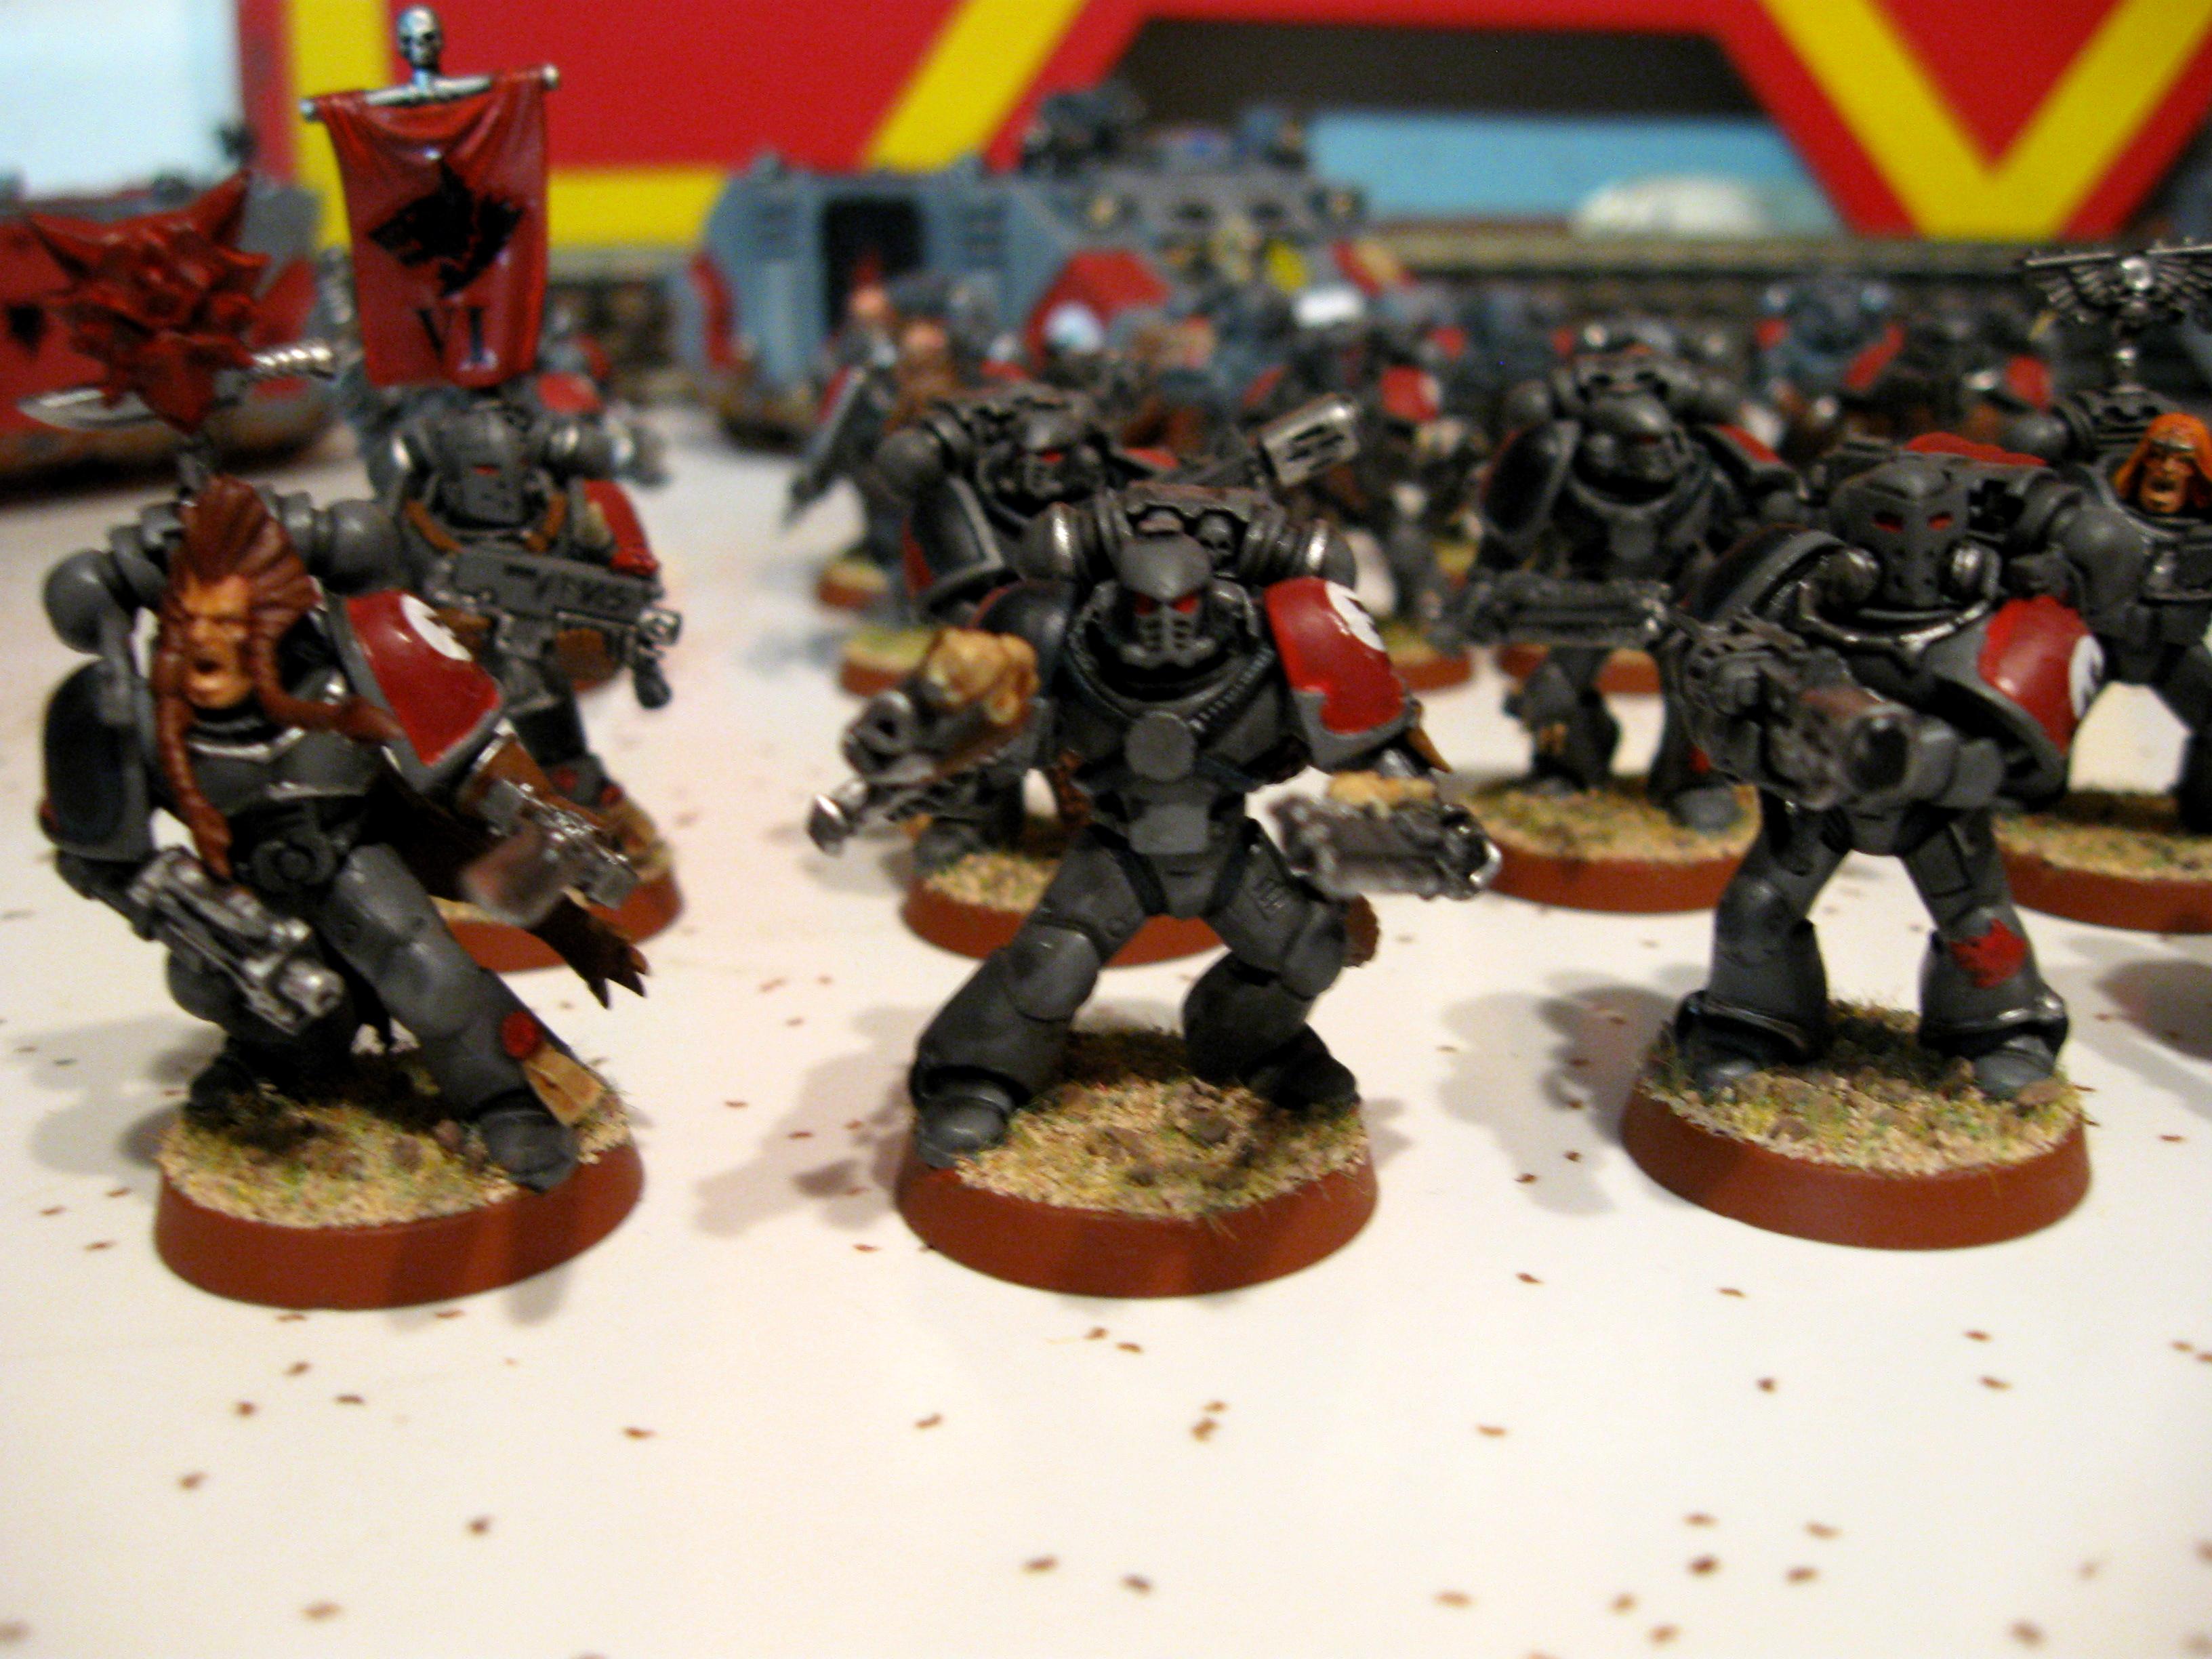 Pre Heresy, Space Marines, Space Wolves, Warhammer 40,000